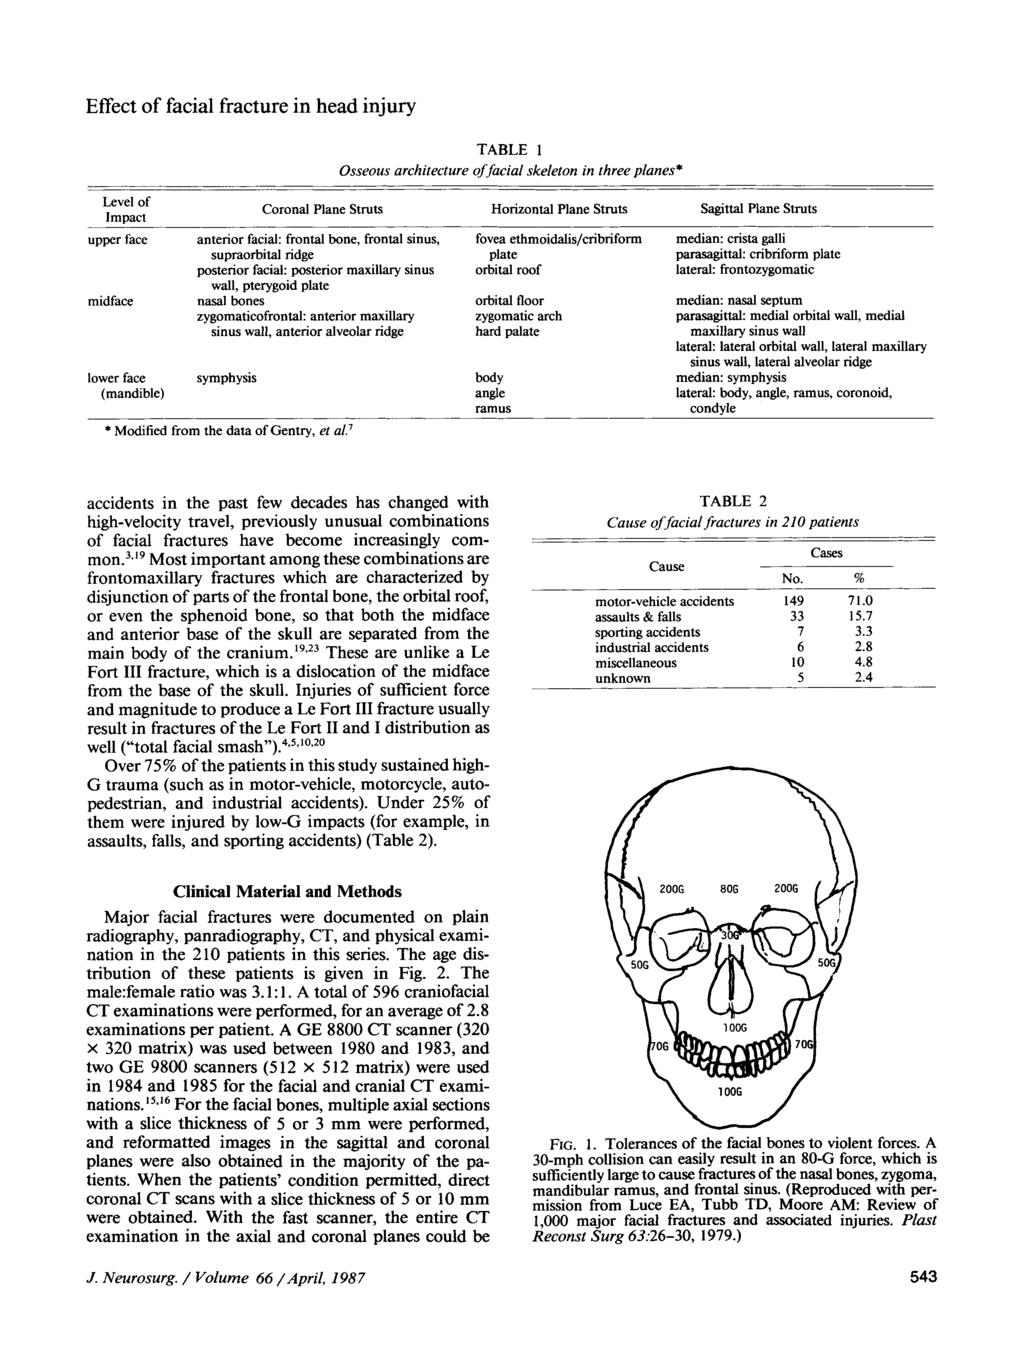 Effect of facial fracture in head injury TABLE 1 Osseous architecture of facial skeleton in three planes* Level of Coronal Plane Struts Horizontal Plane Struts Sagittal Plane Struts Impact upper face